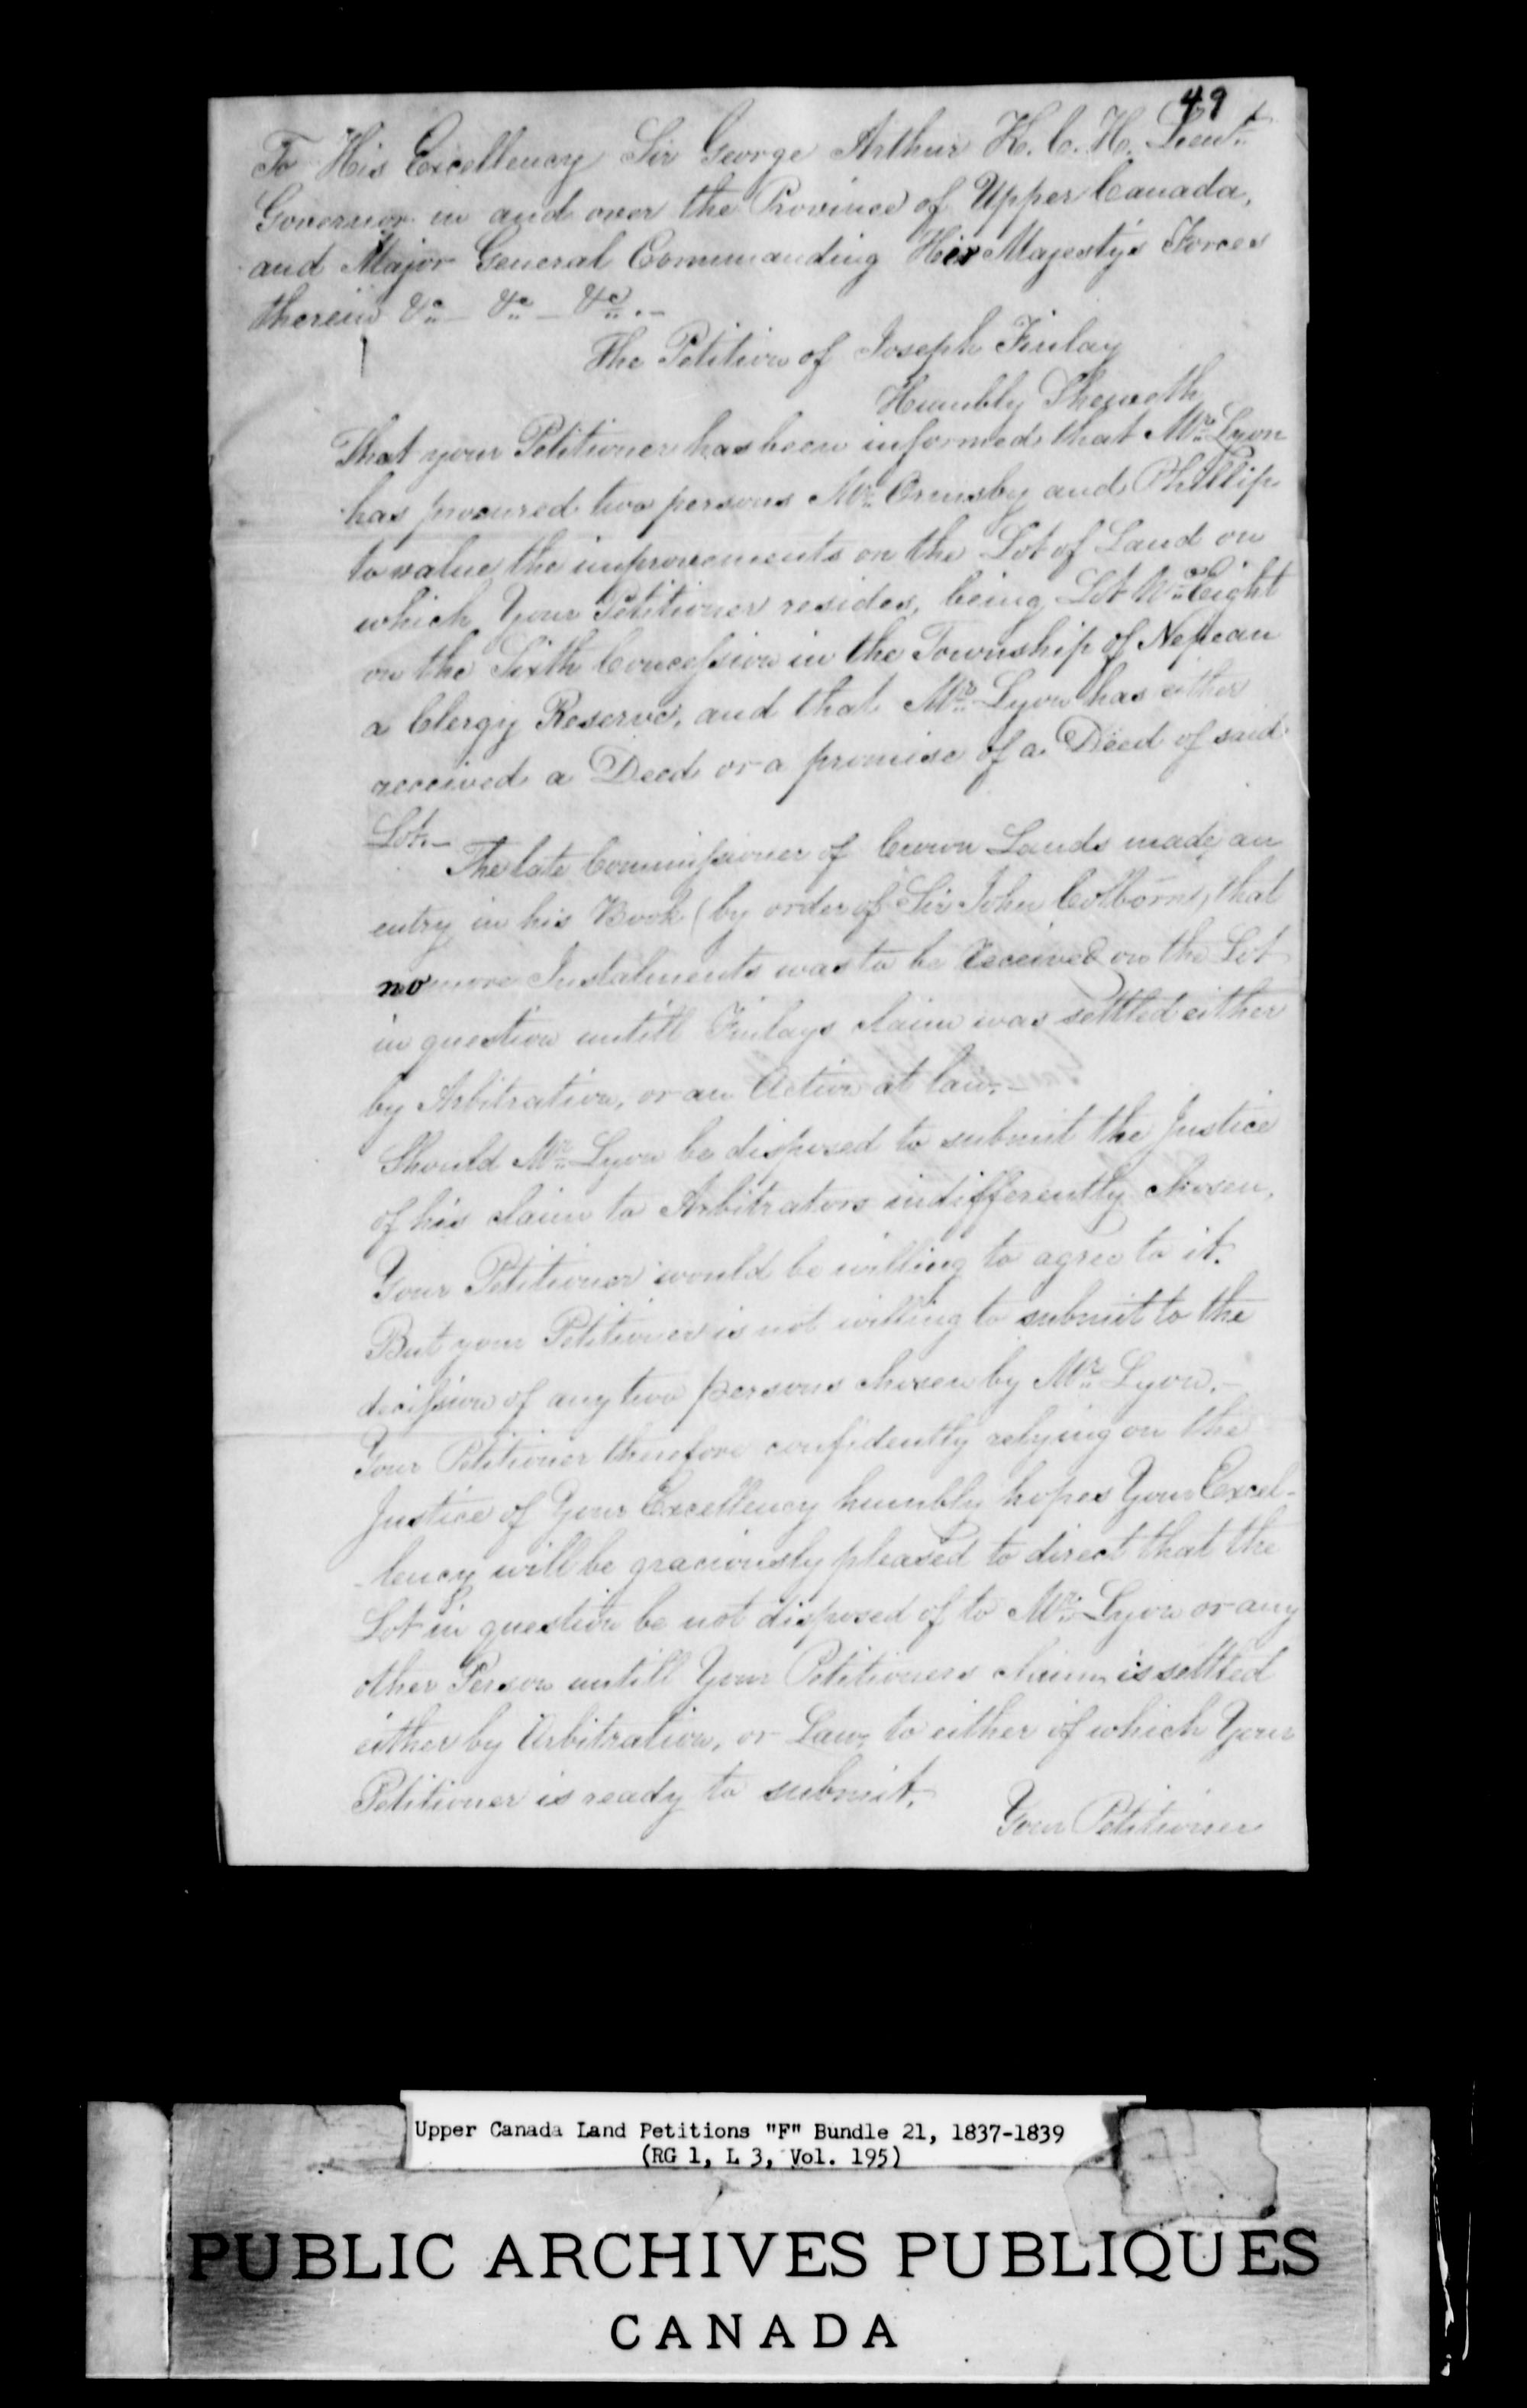 Title: Upper Canada Land Petitions (1763-1865) - Mikan Number: 205131 - Microform: c-1900